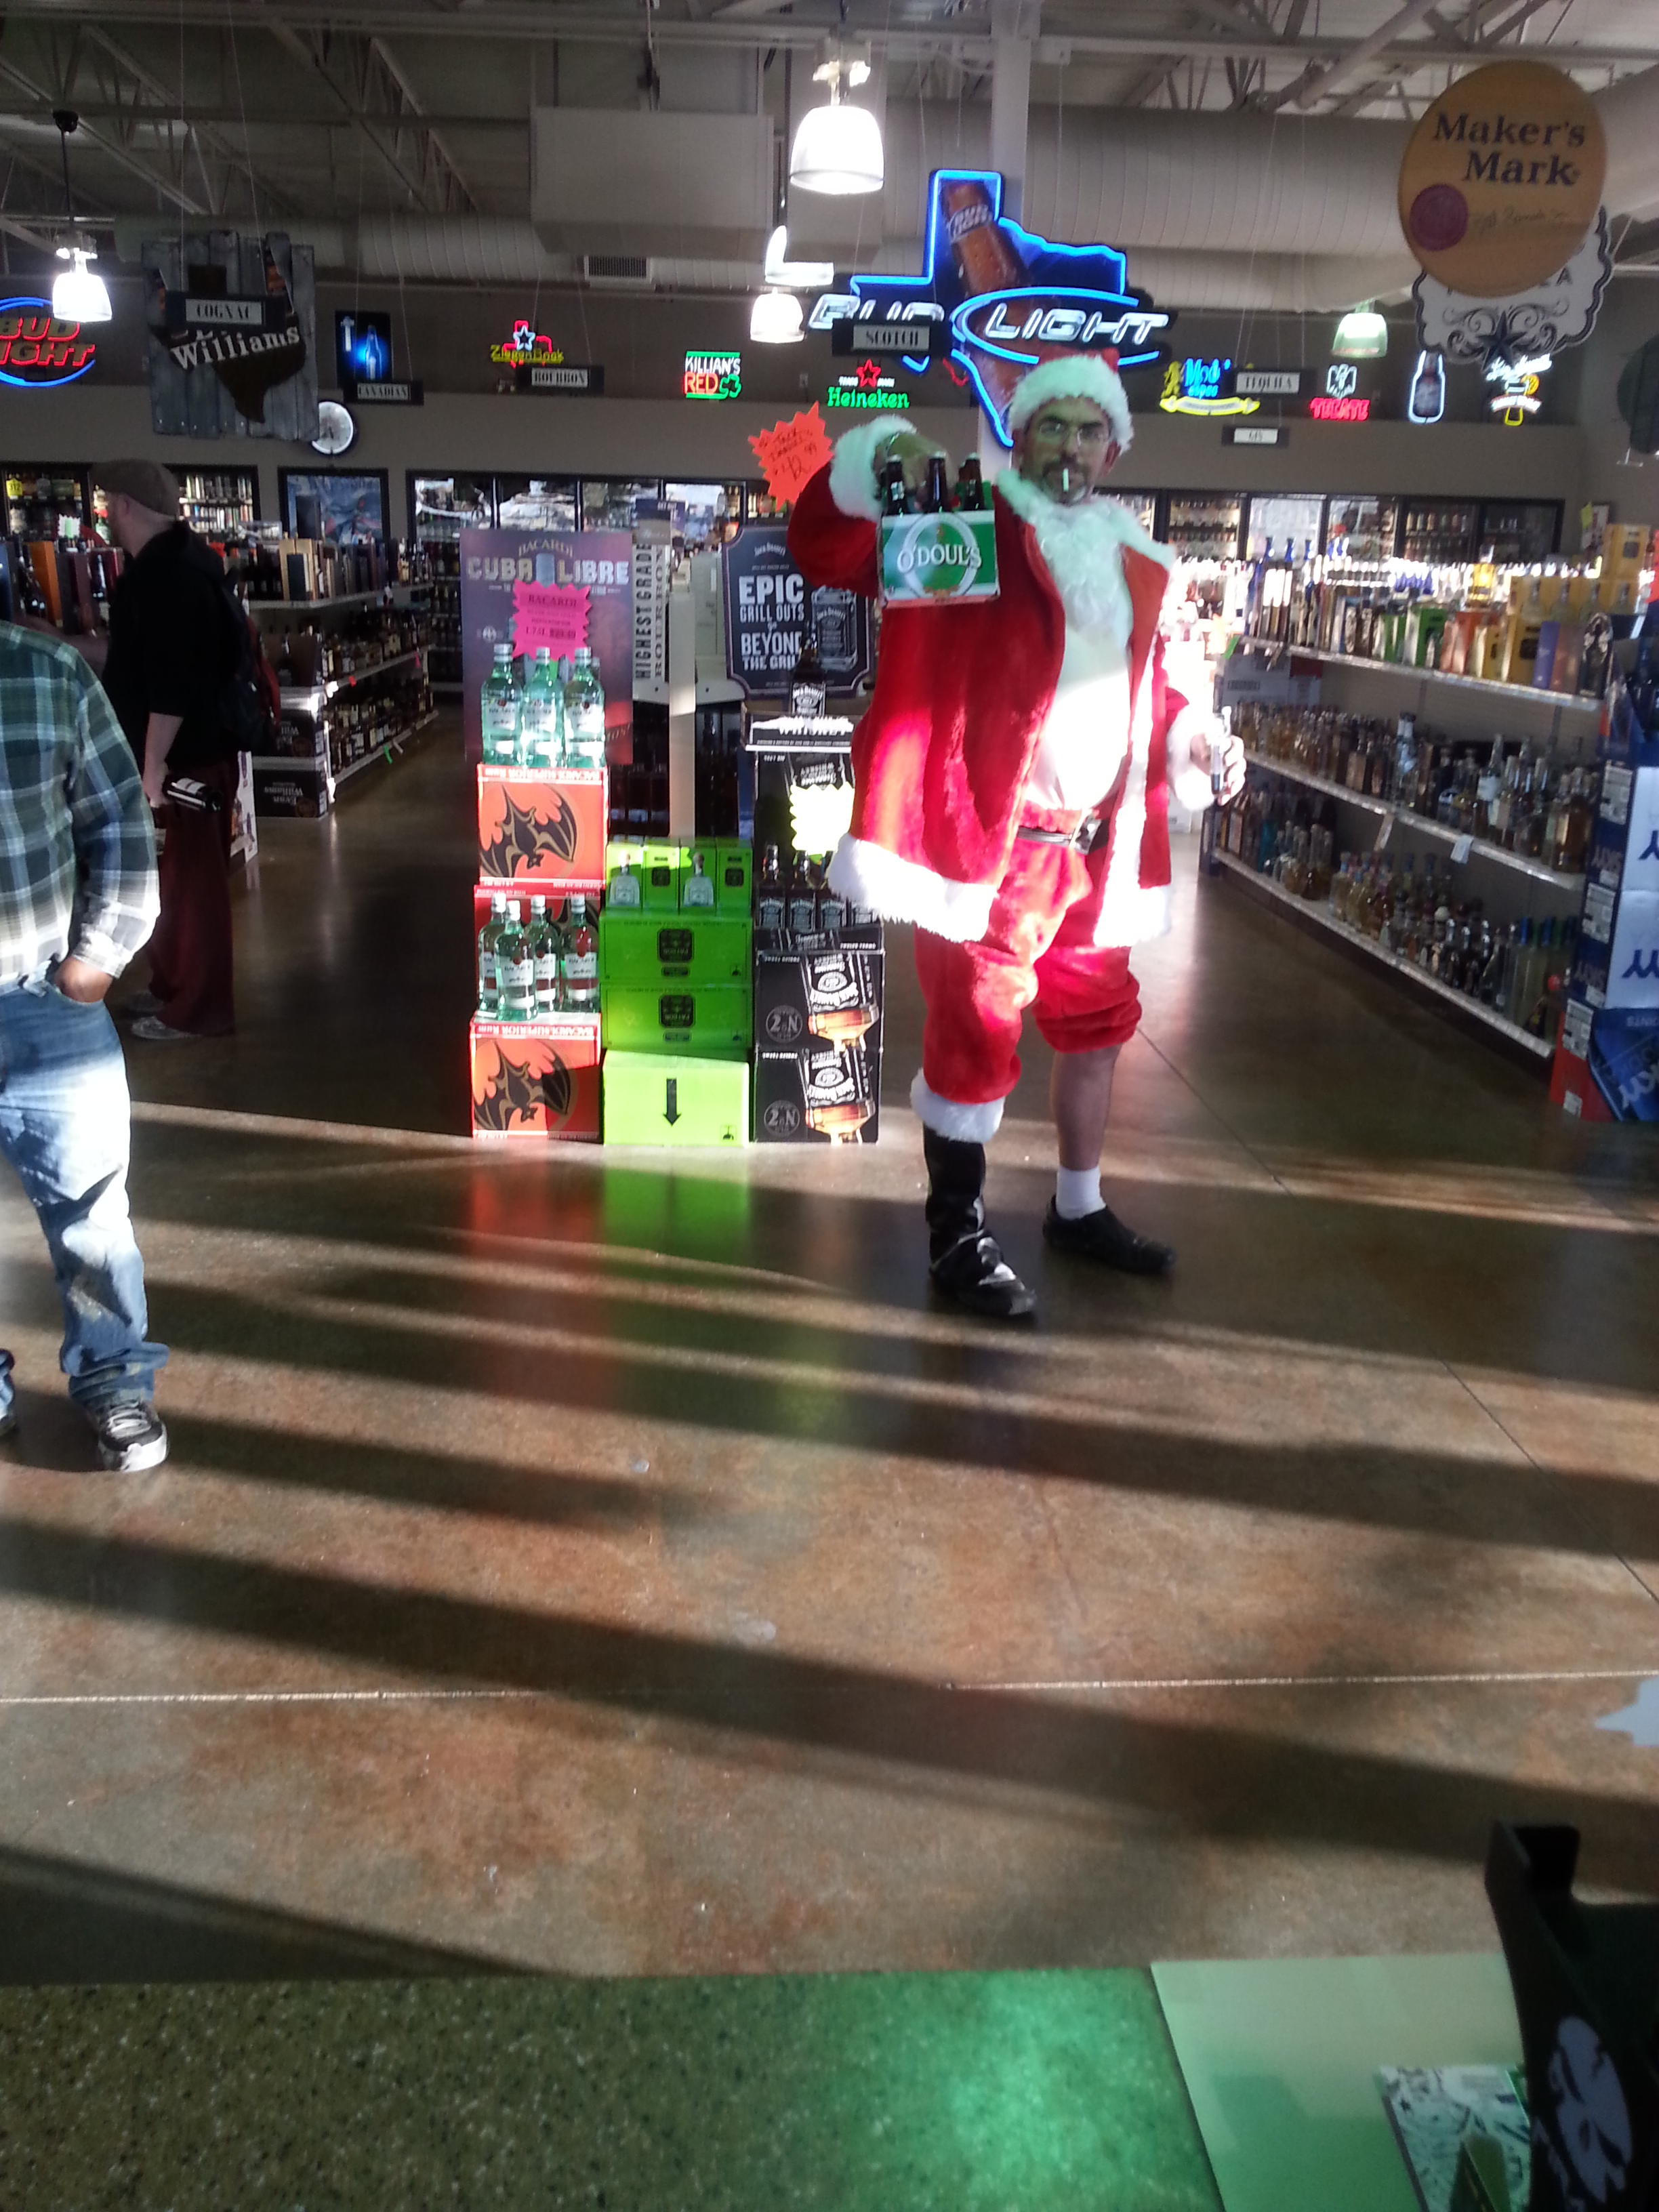 Bad Santa getting the little kiddos non alcoholic beer for Christmas